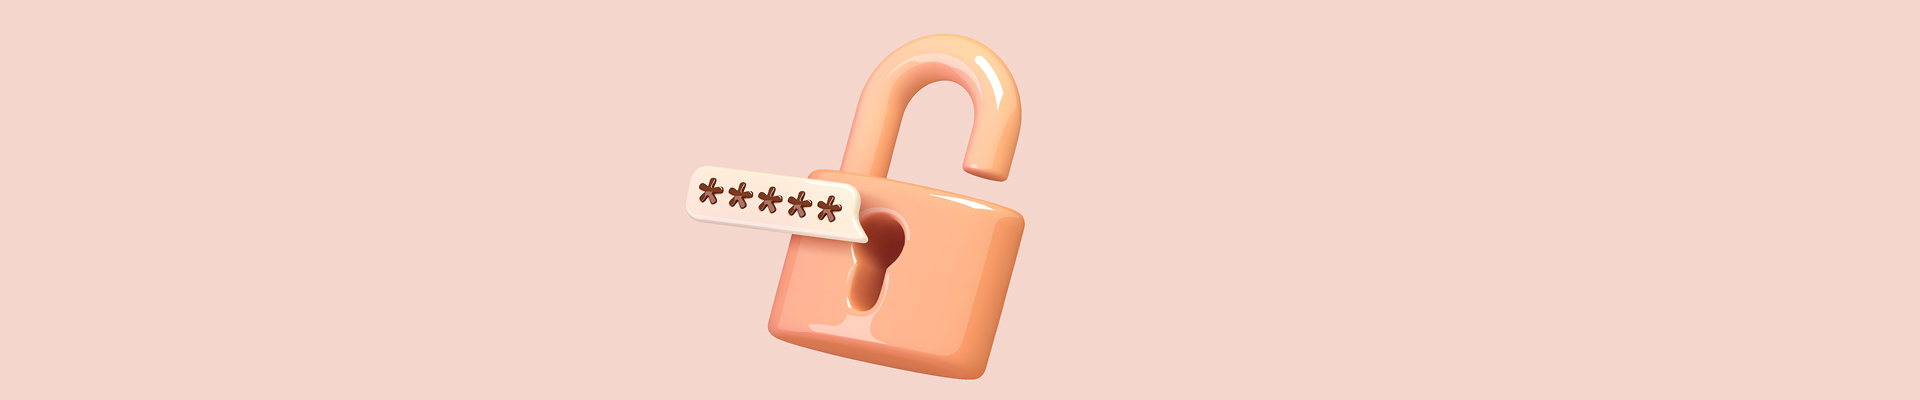 Protecting your digital assets: the art of password security